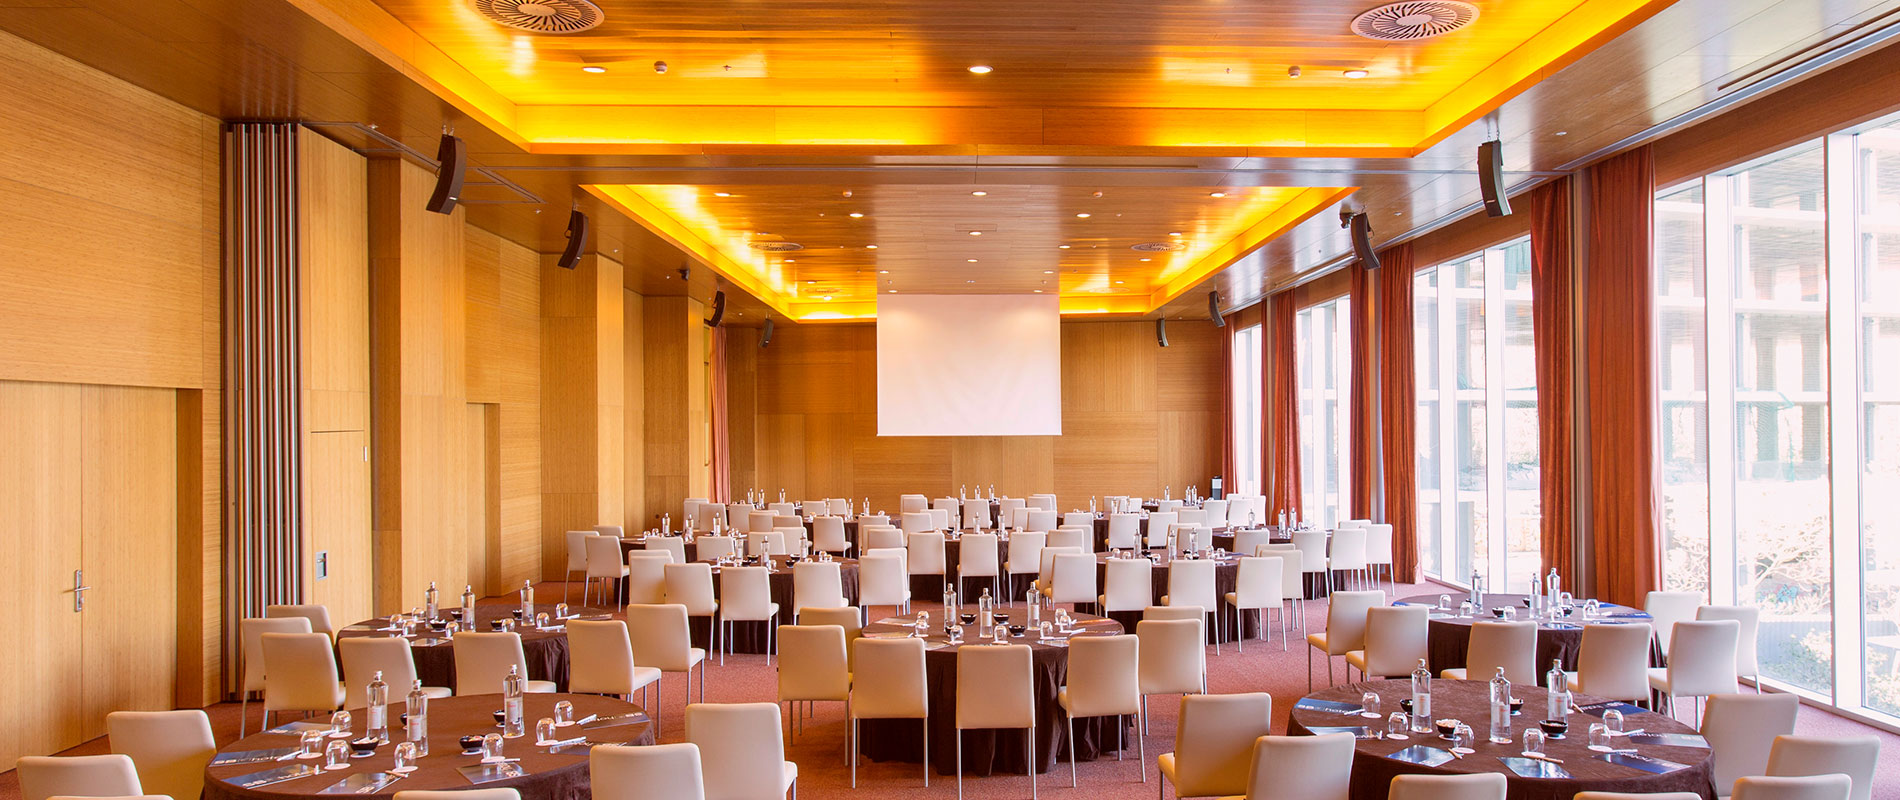 Hotel Events Barcelona